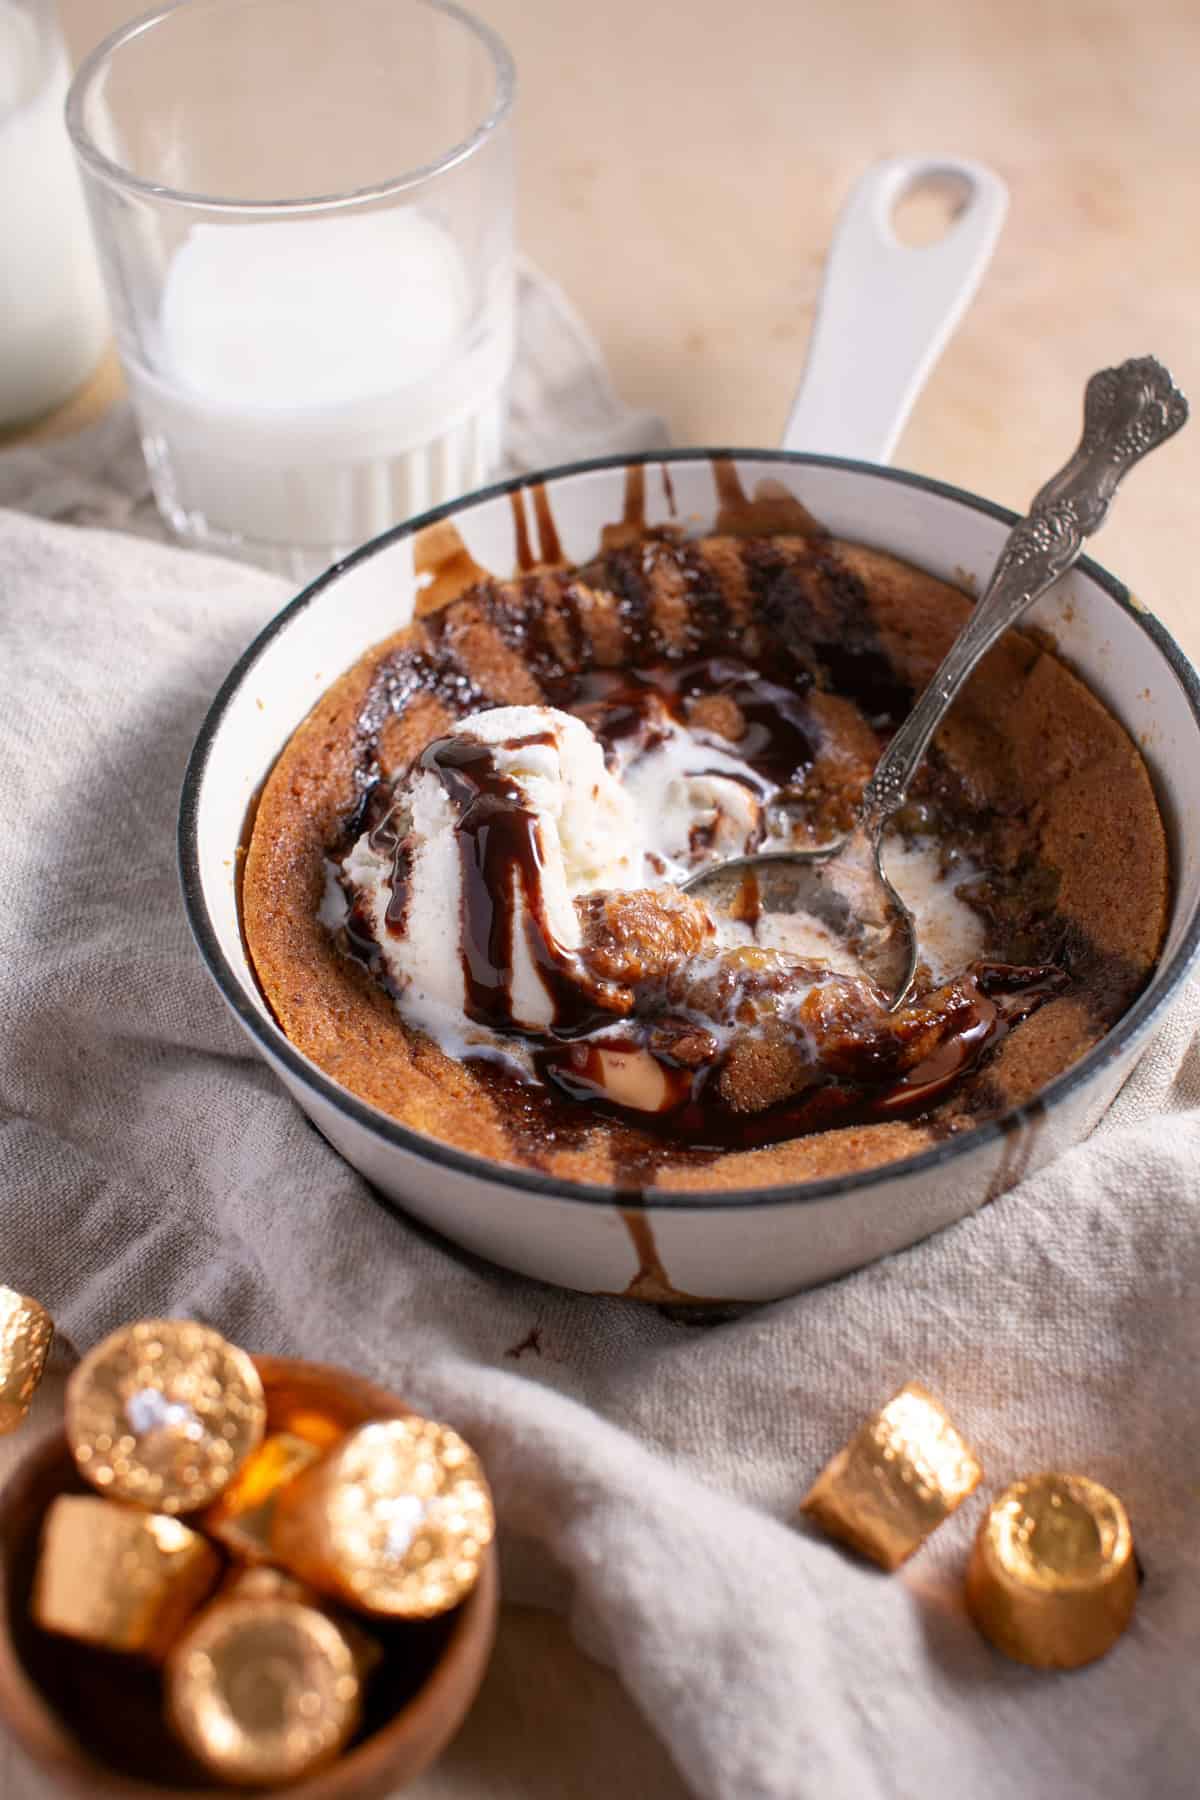 Skillet Chocolate Caramel Cookie with a scoop of ice cream and chocolate syrup. 